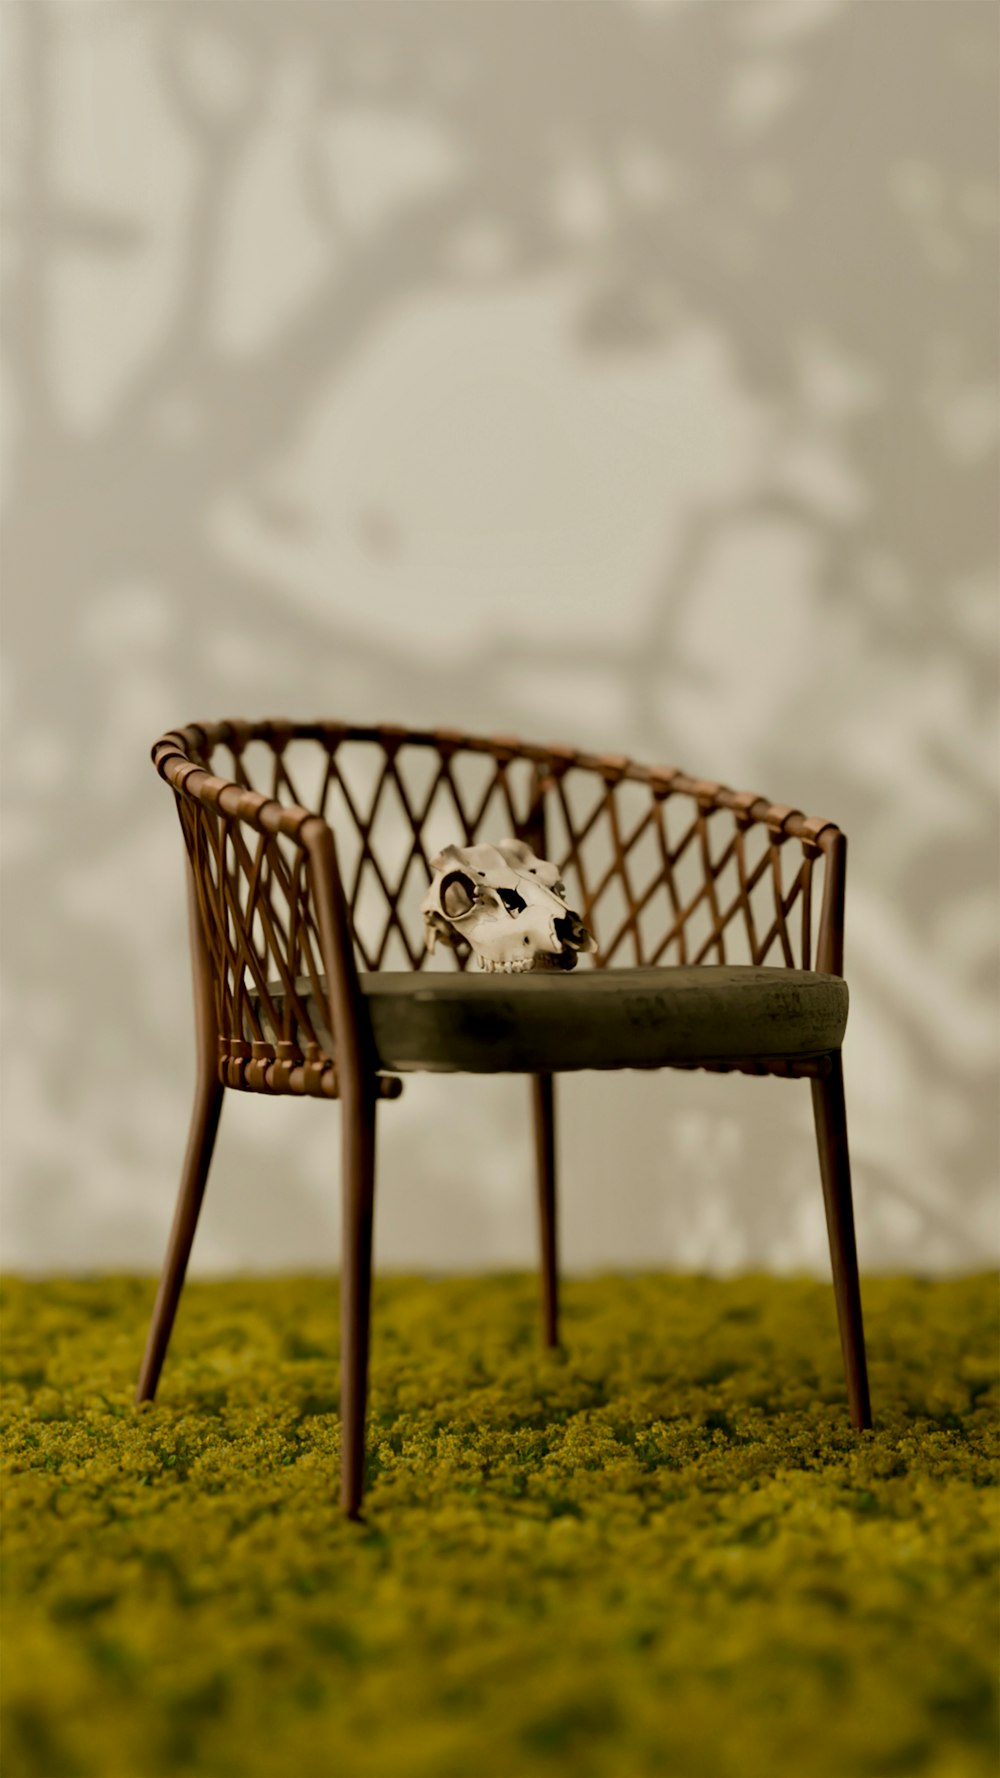 a miniature chair with a dog sleeping on top of it